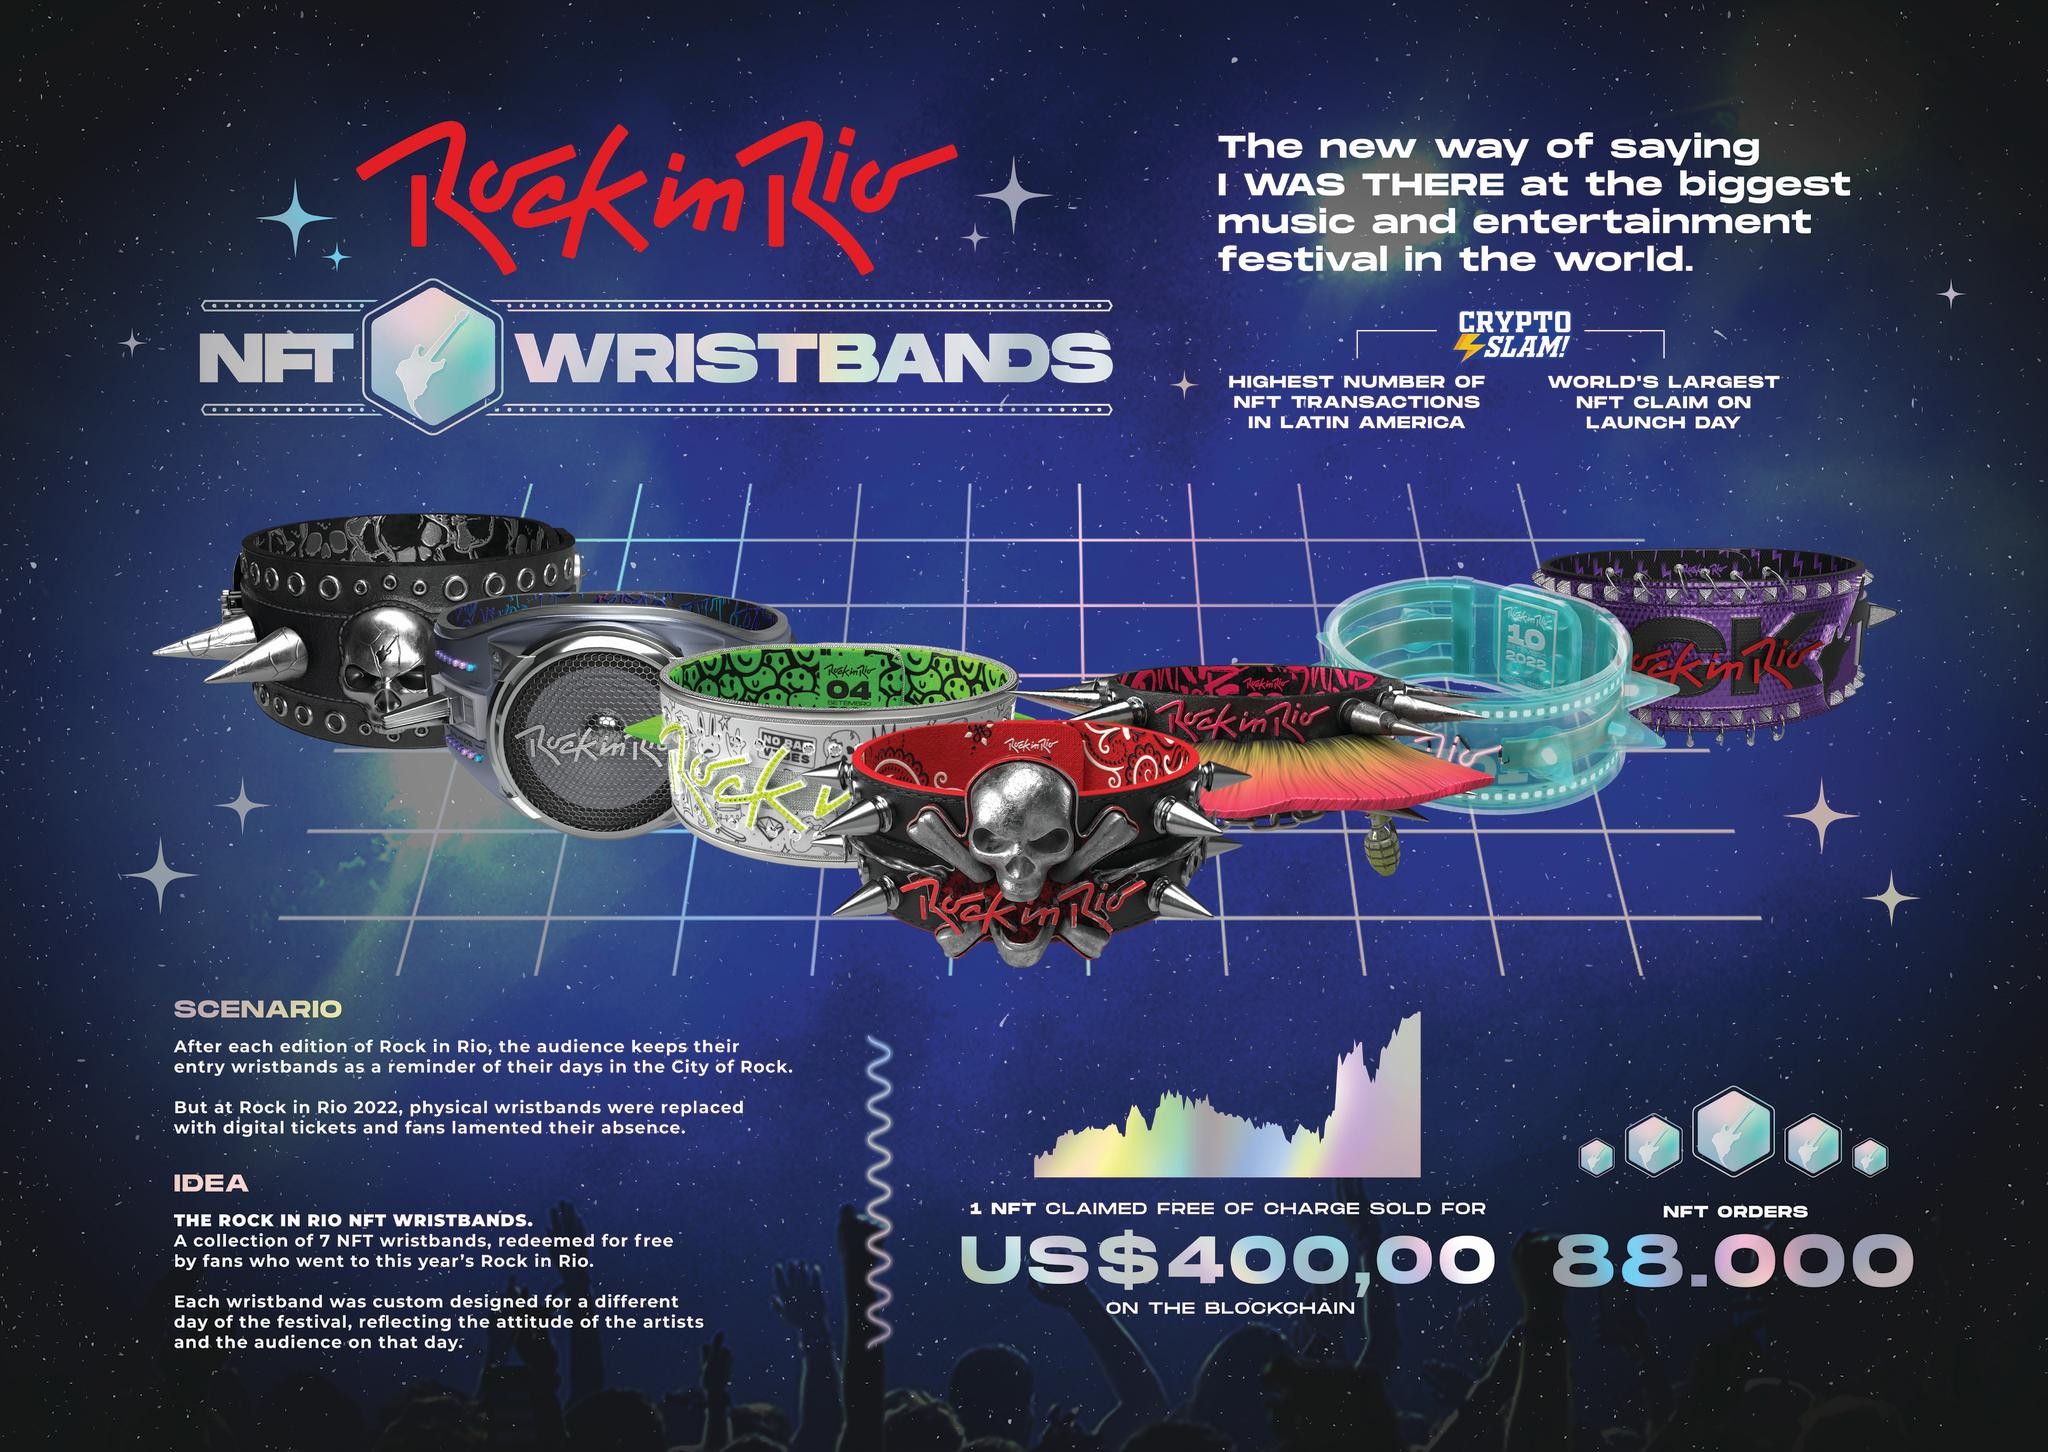 The Rock in Rio NFT wristbands